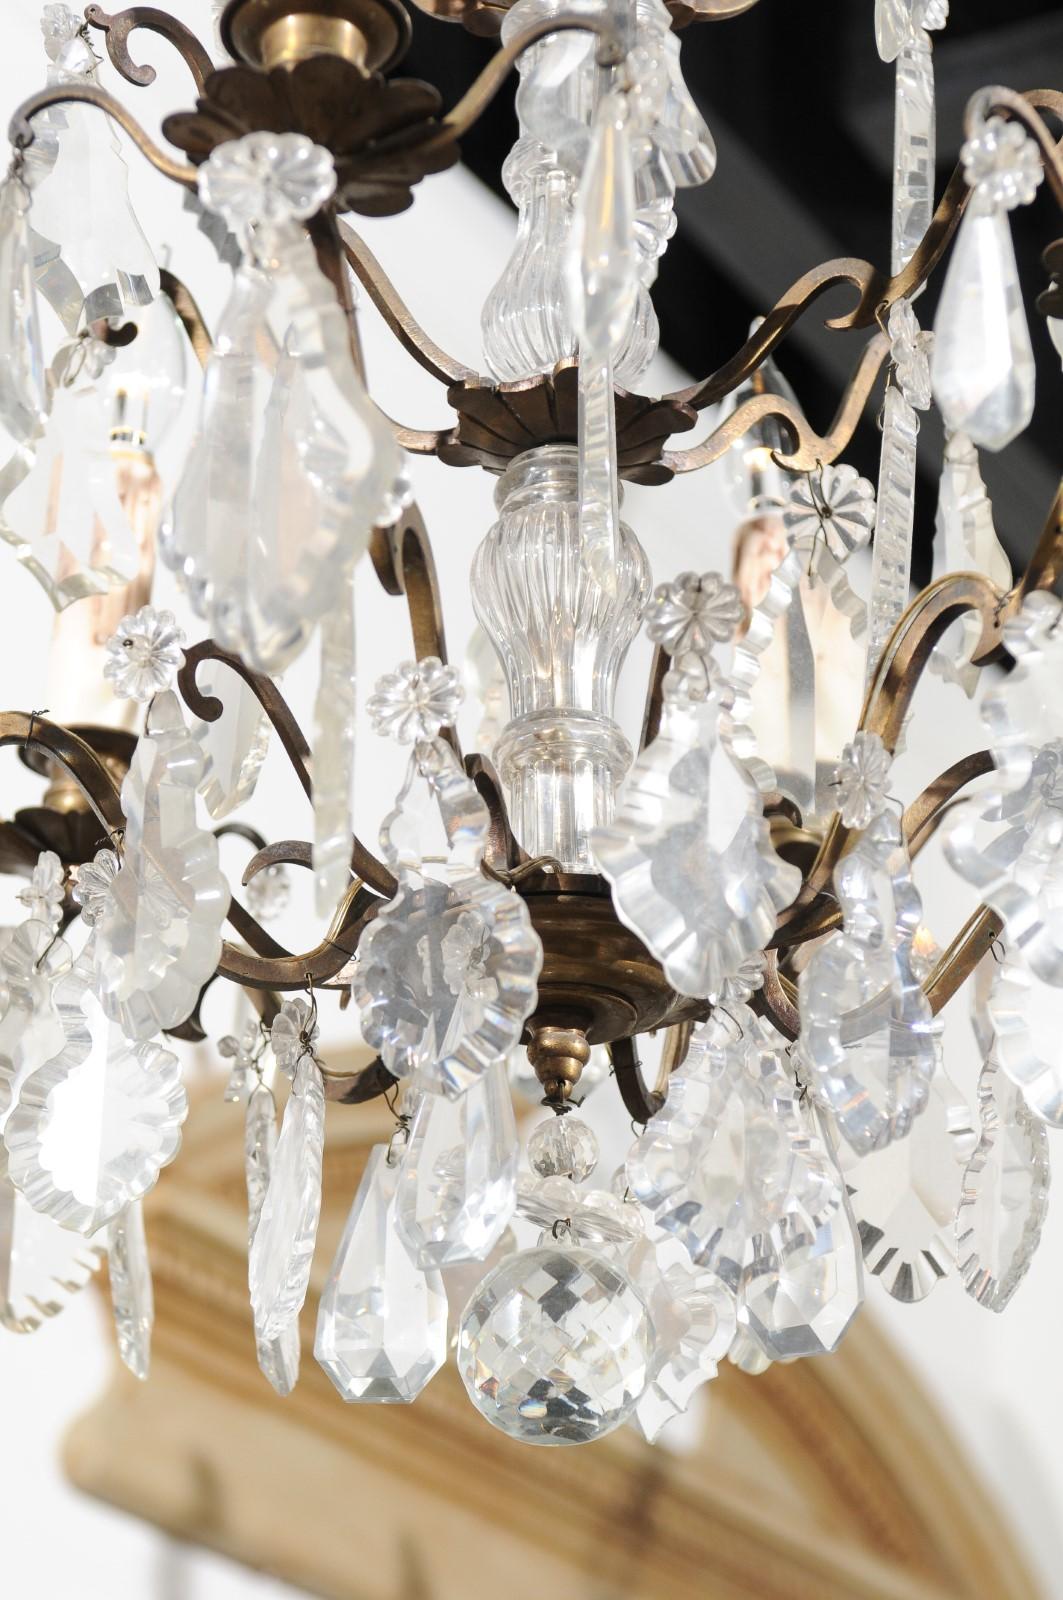 A French Belle-Epoque six-light crystal chandelier from the early 20th century, with brass armature. Born in France during the early years of the 20th century, this exquisite chandelier features a central crystal column, supporting a scrolling brass